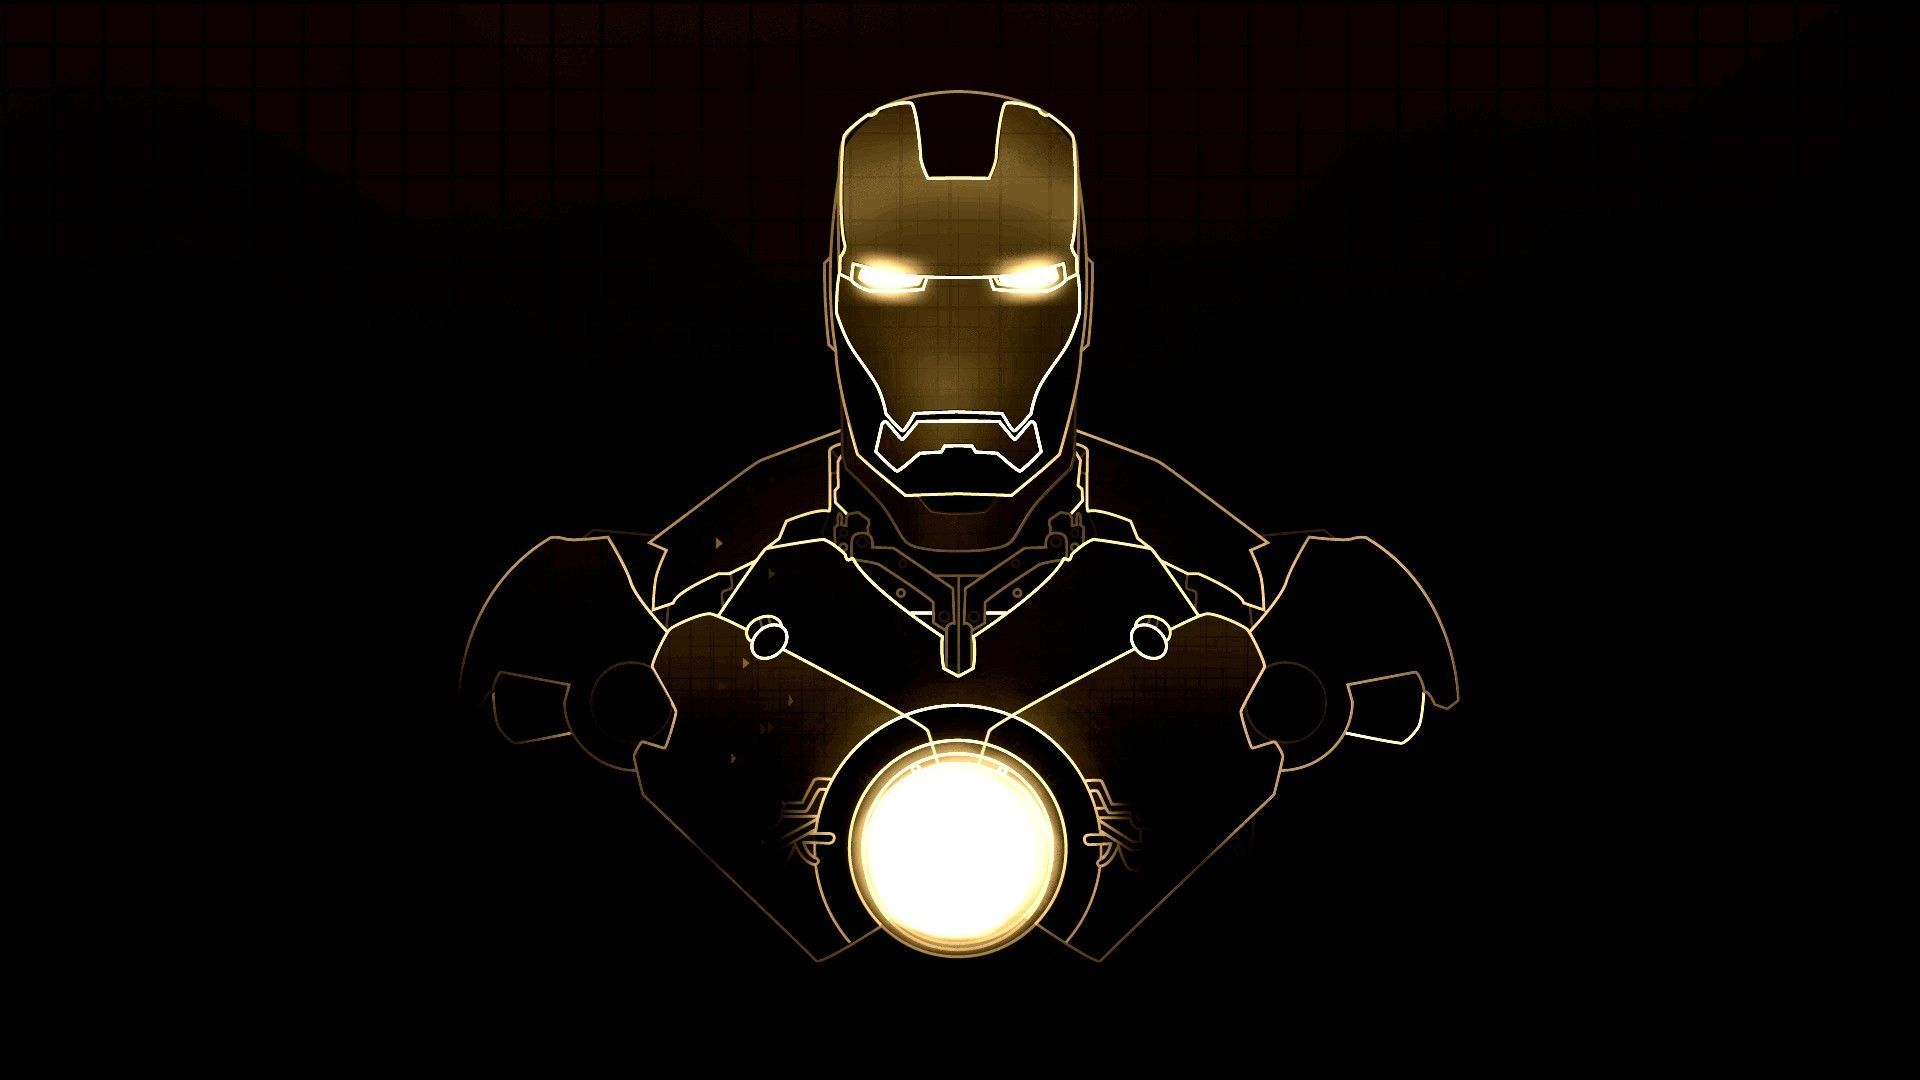 Iron Man High Quality Wallpapers 7872 - HD Wallpaper Site